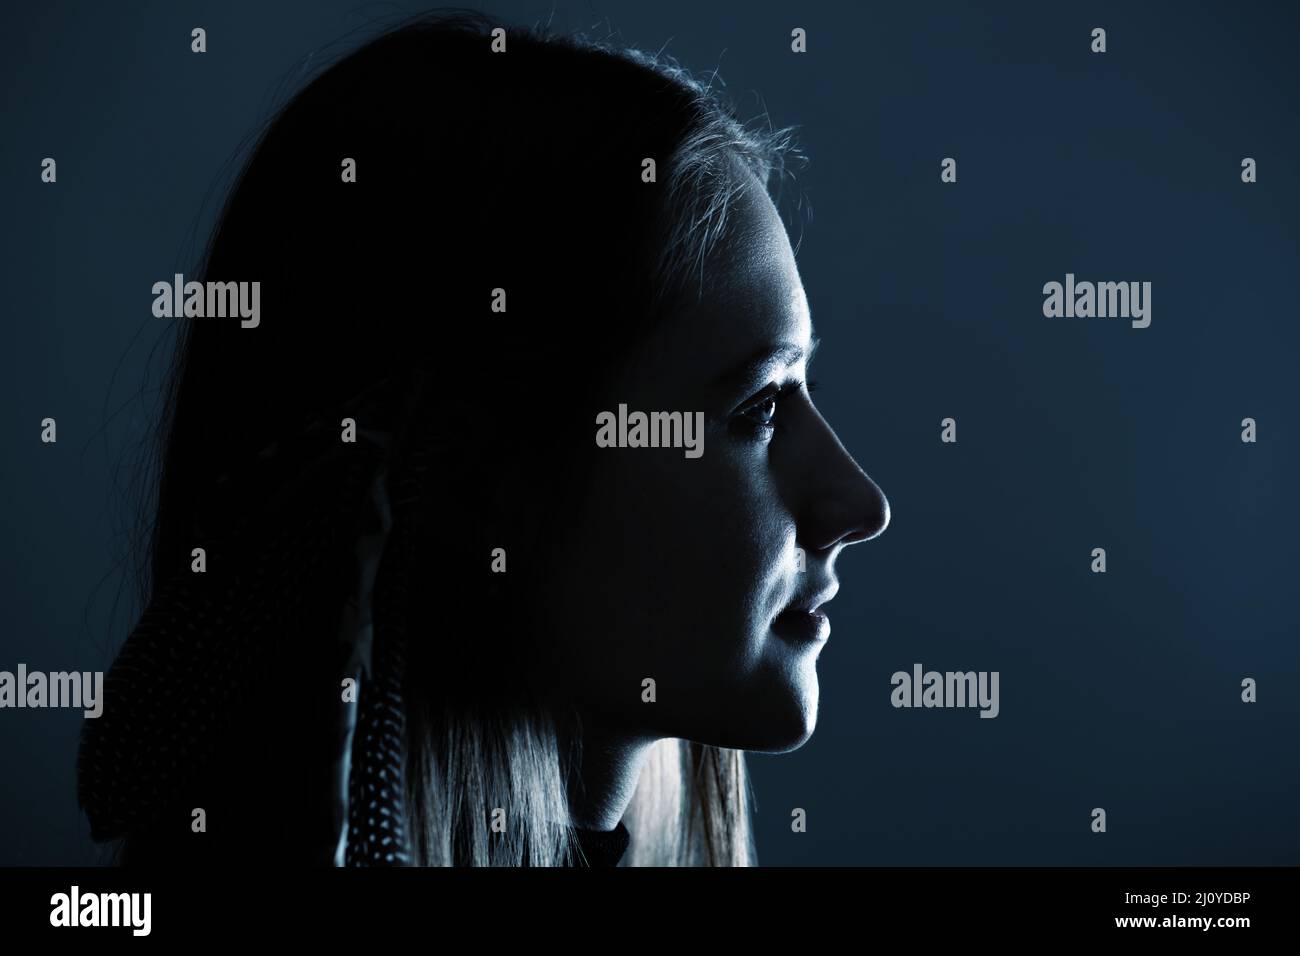 Close-up woman with feathers in her hairs dark profile portrait. Model face partly illuminated by blue light imitating television or moon light. Selec Stock Photo